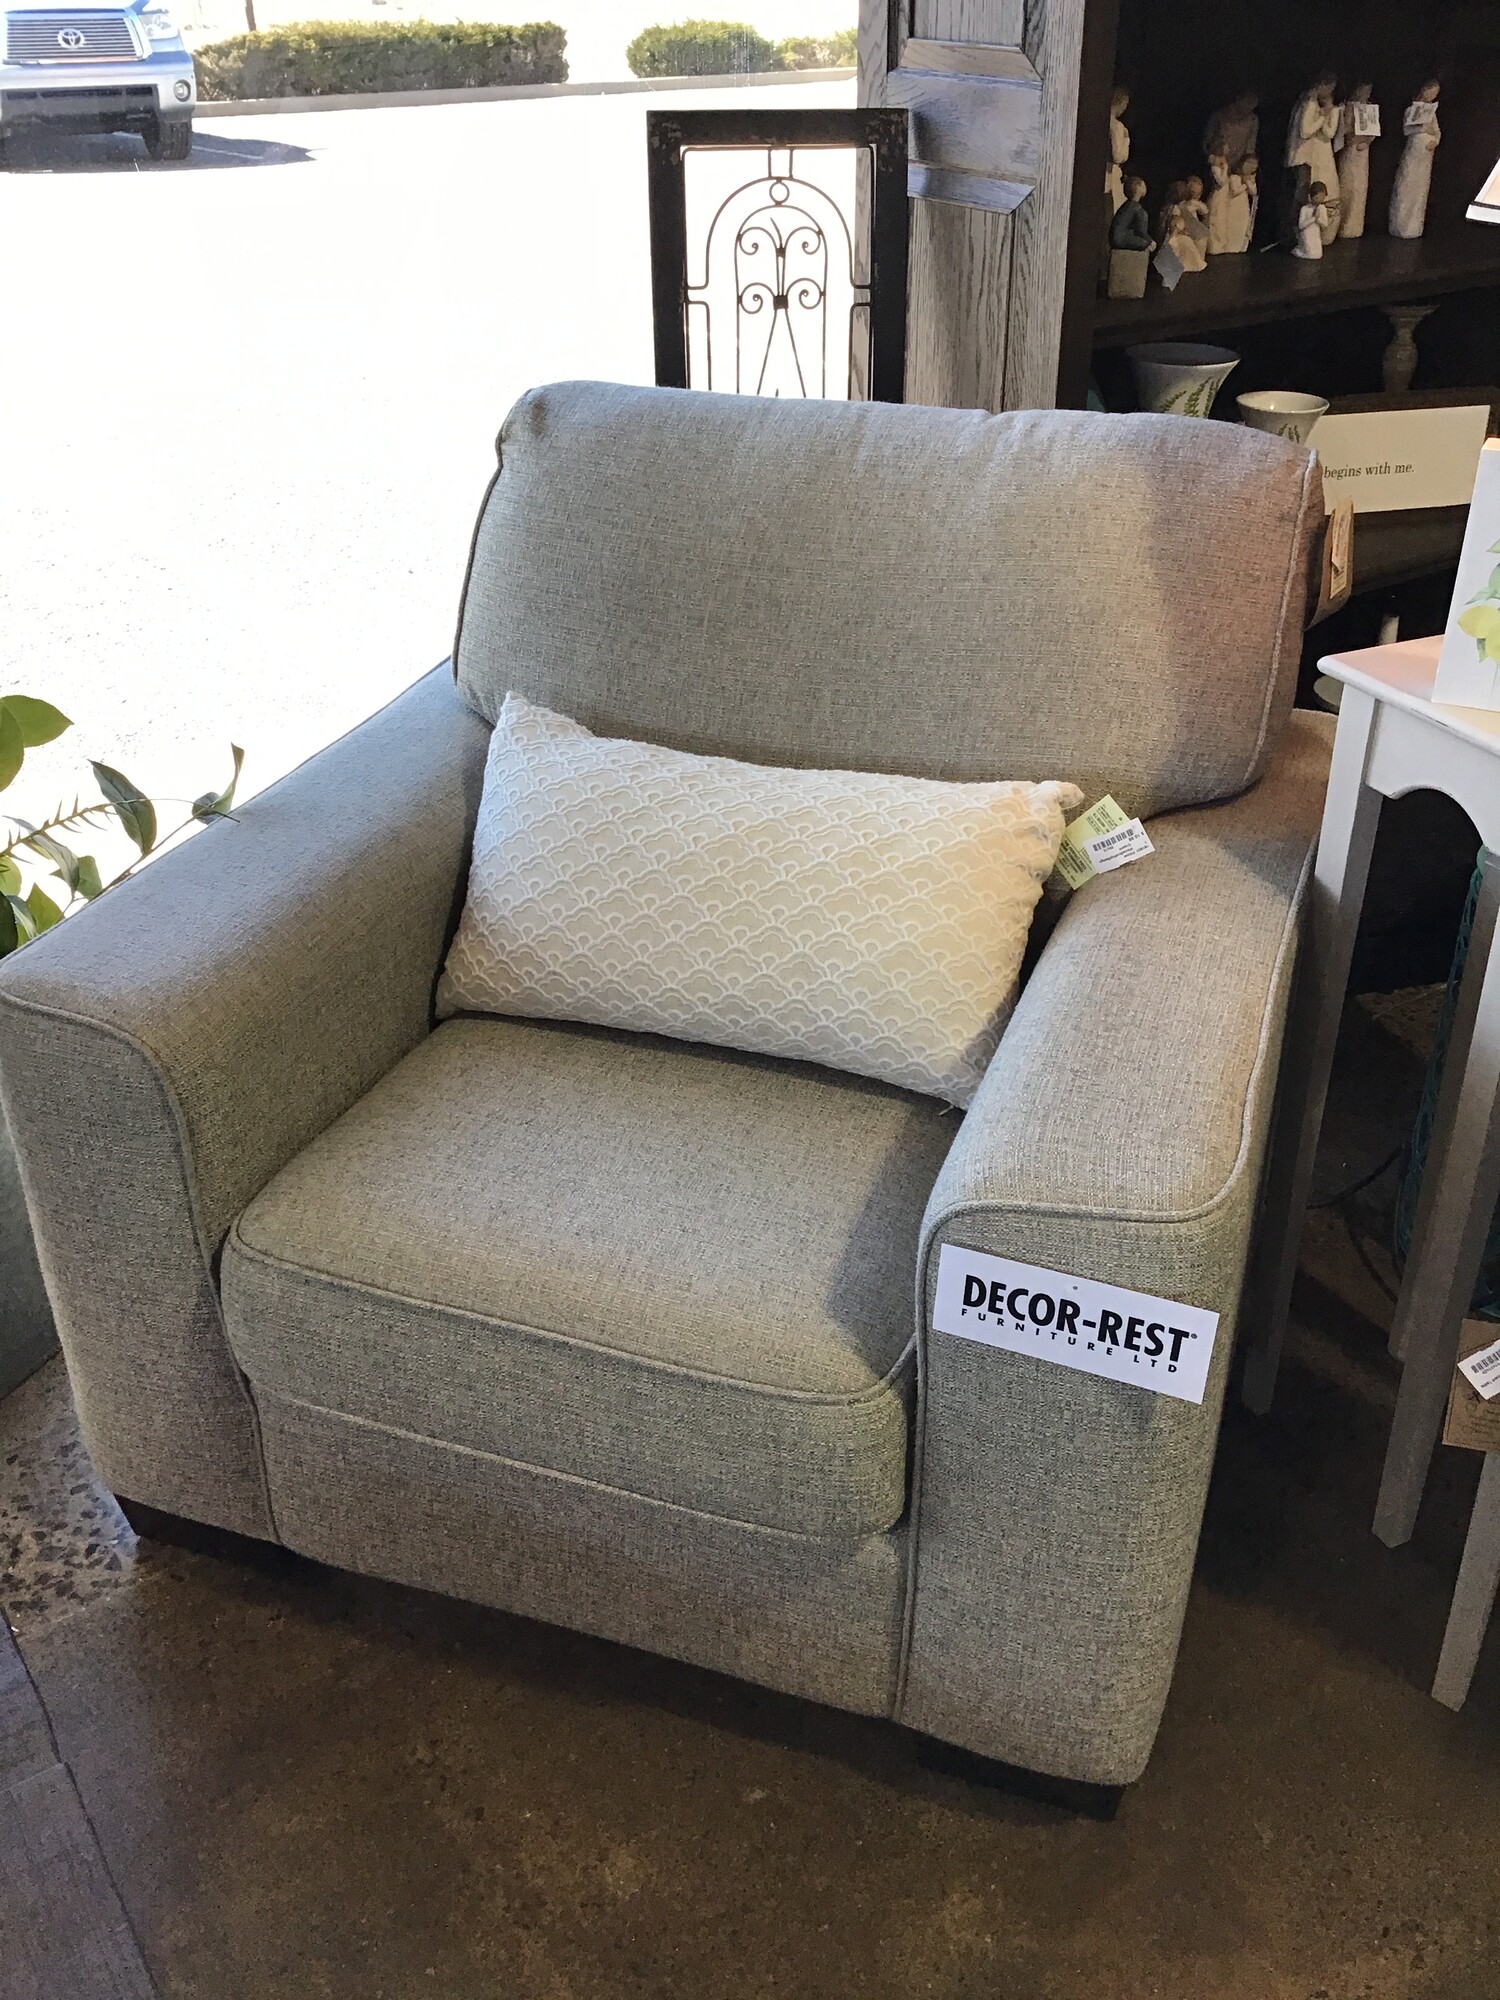 This beautiful neutral Chair is in excellent condition and very comfortable! It features a flippable seat cushion and stationary back cushion. The fabric is a gray/cream tweed. Great piece for your family room, game room, living room or bedroom..
Dimensions are 39 in x 39 in x 38 in